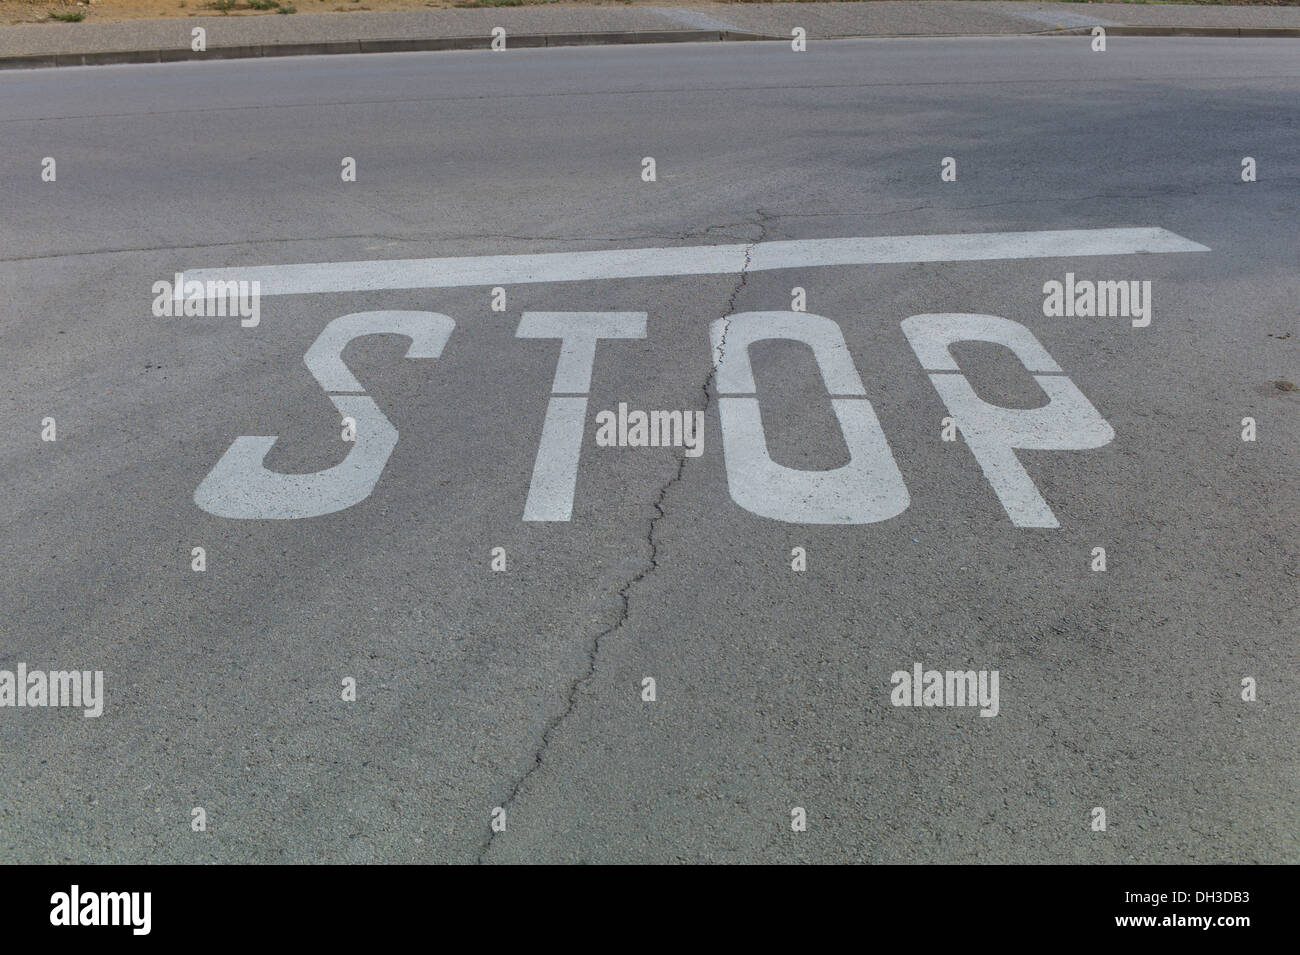 A stop sign painted on the road in Spain Stock Photo